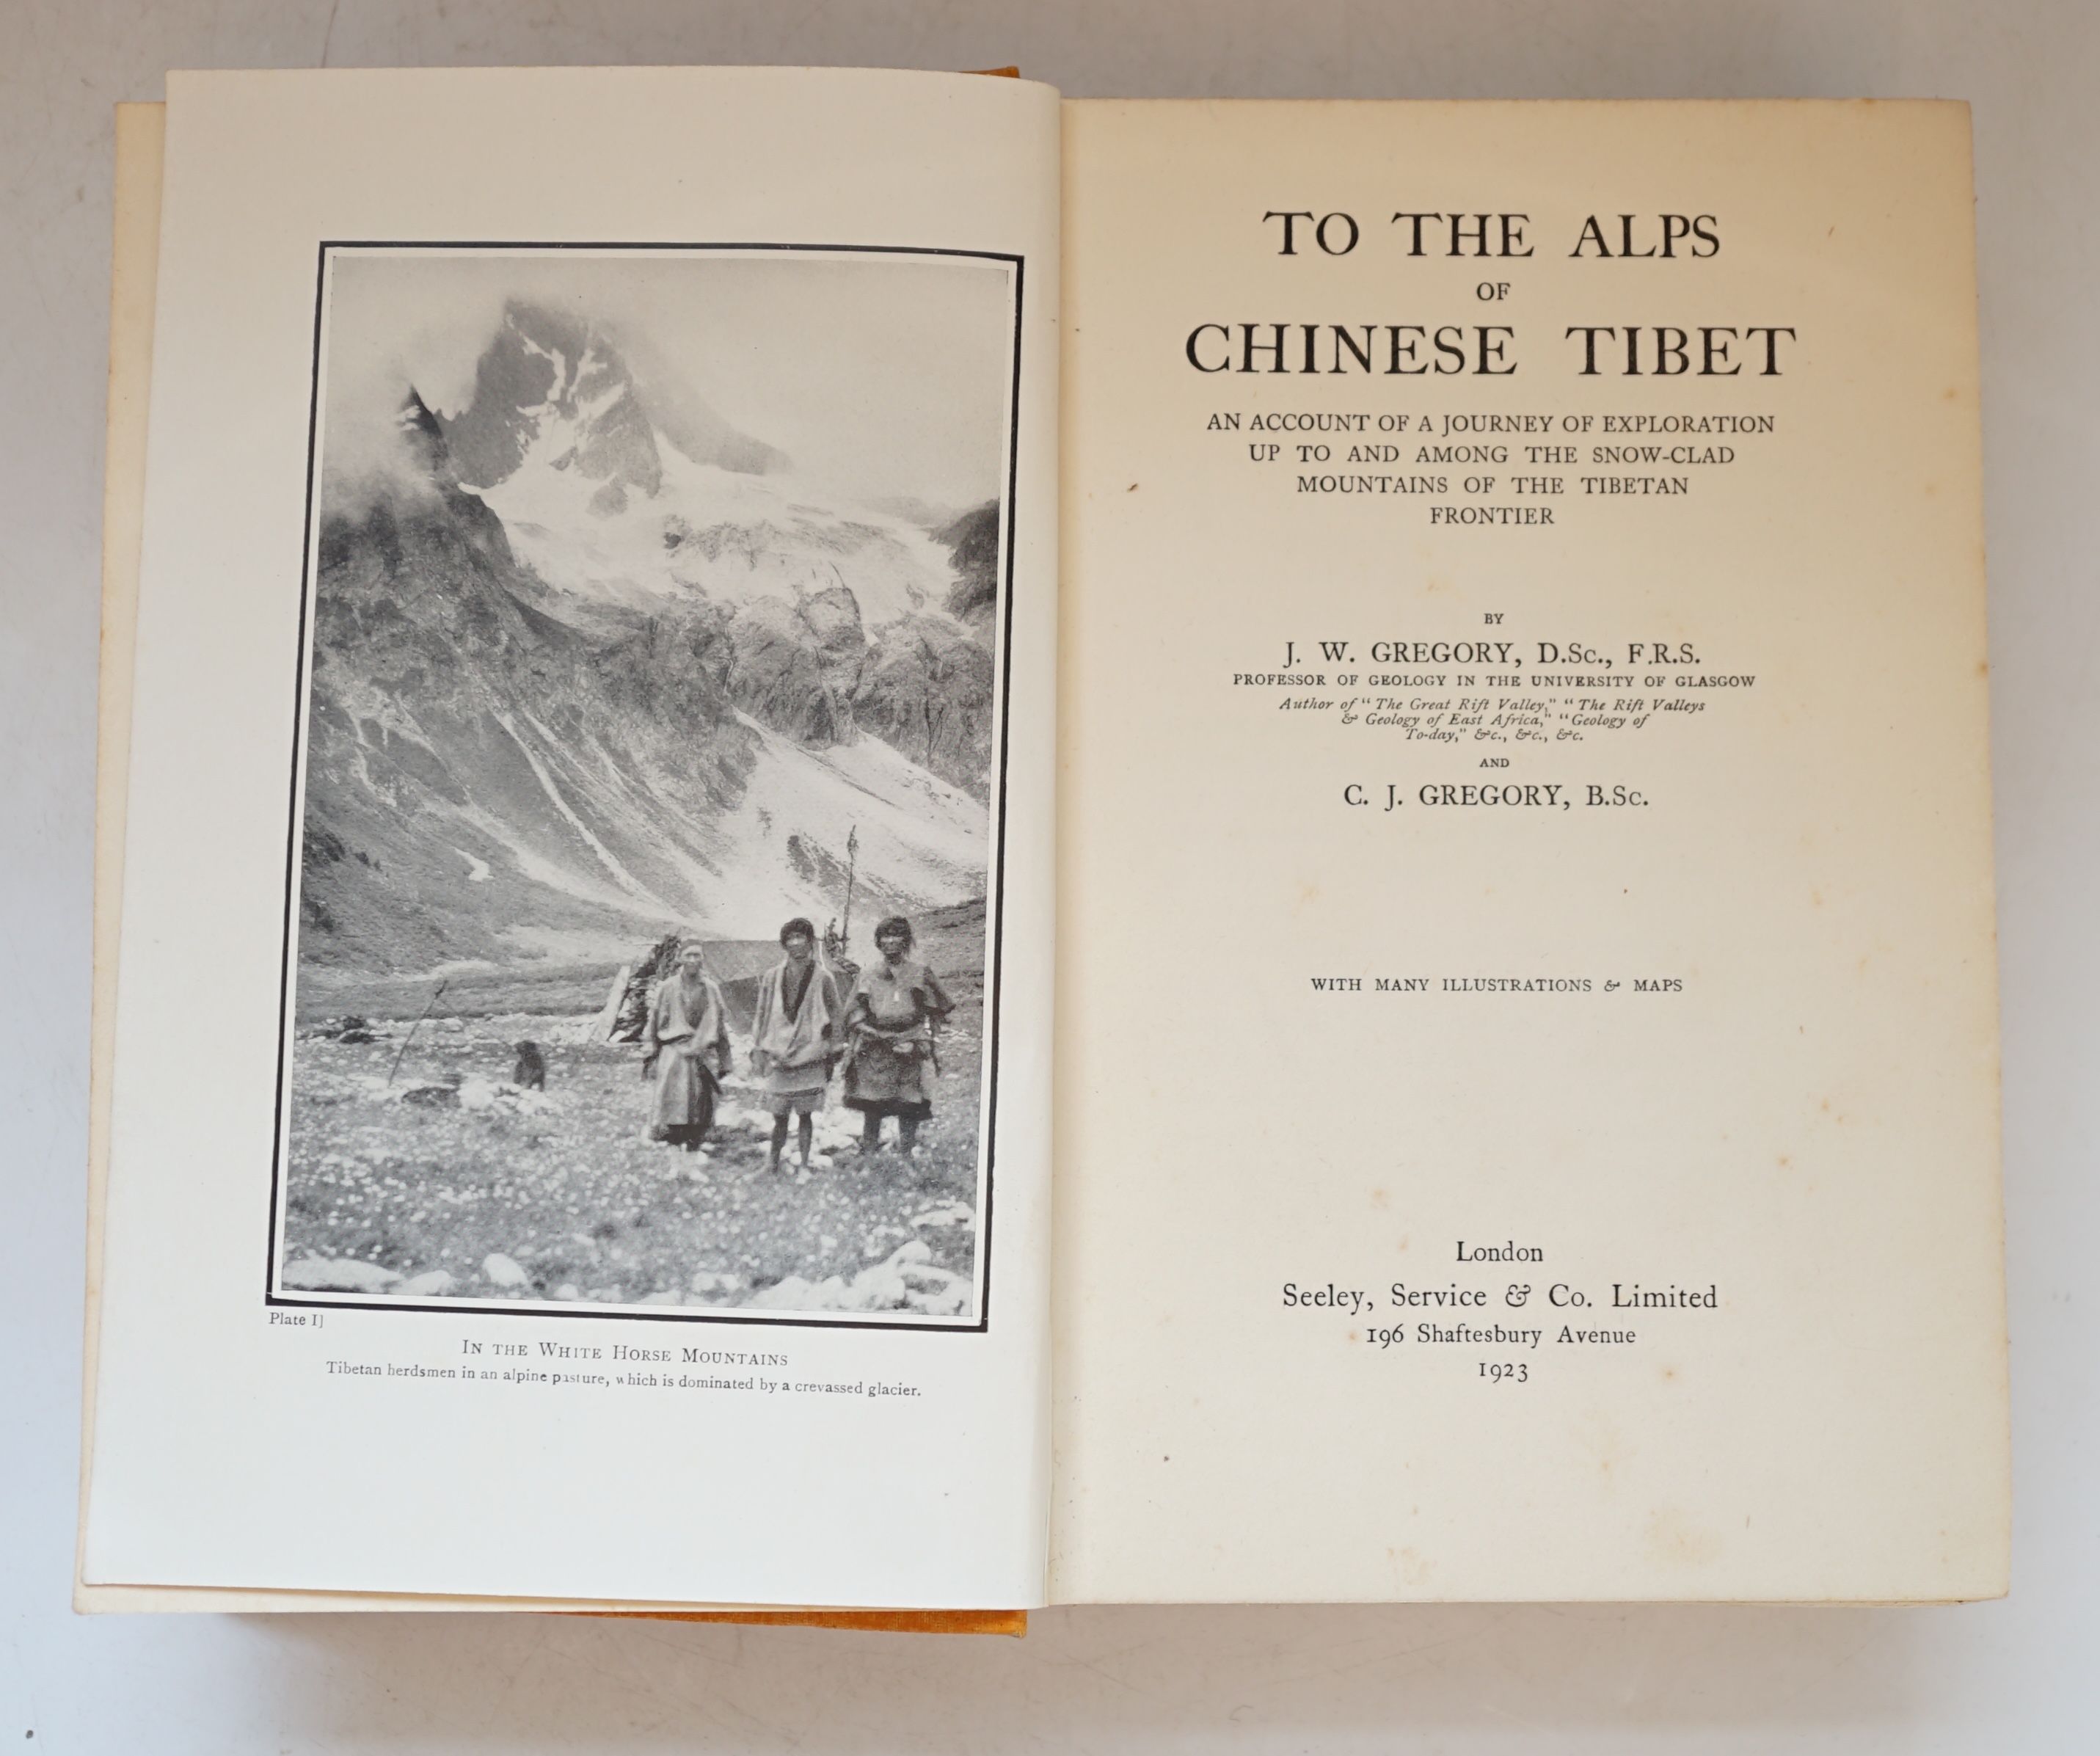 W. Gregory & C. J. Gregory - To the Alps of Chinese Tibet, An Account of a Journey of Exploration up to and among the Snow-Clad Mountains of the Tibetan Frontier, 1st edition with 25 black and white illustrations, 7 sket